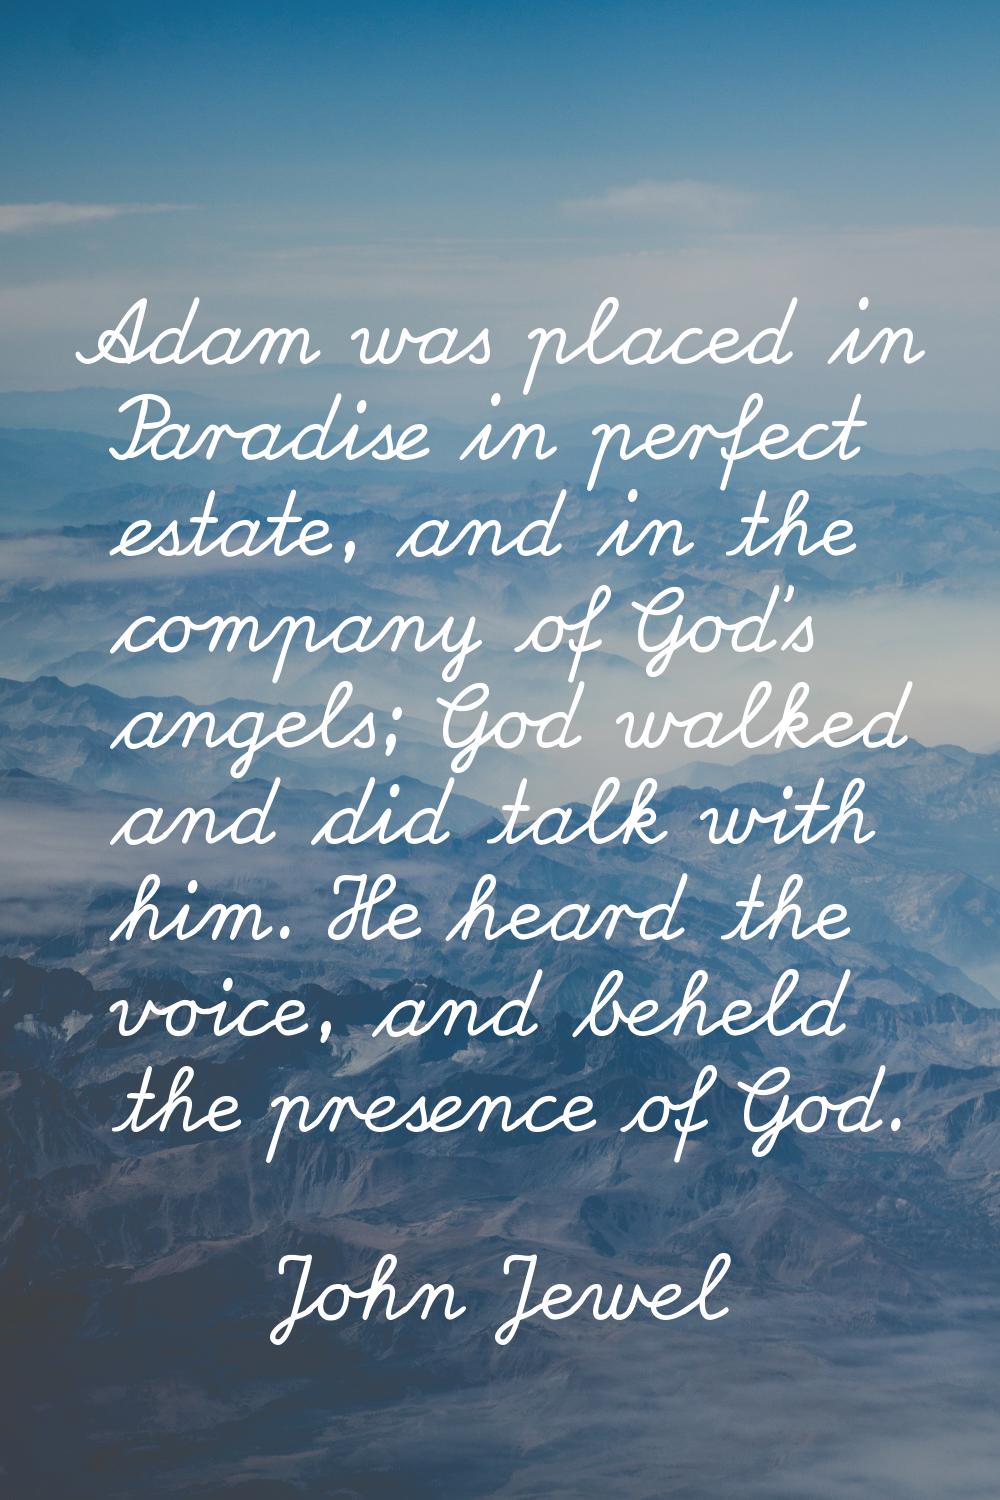 Adam was placed in Paradise in perfect estate, and in the company of God's angels; God walked and d